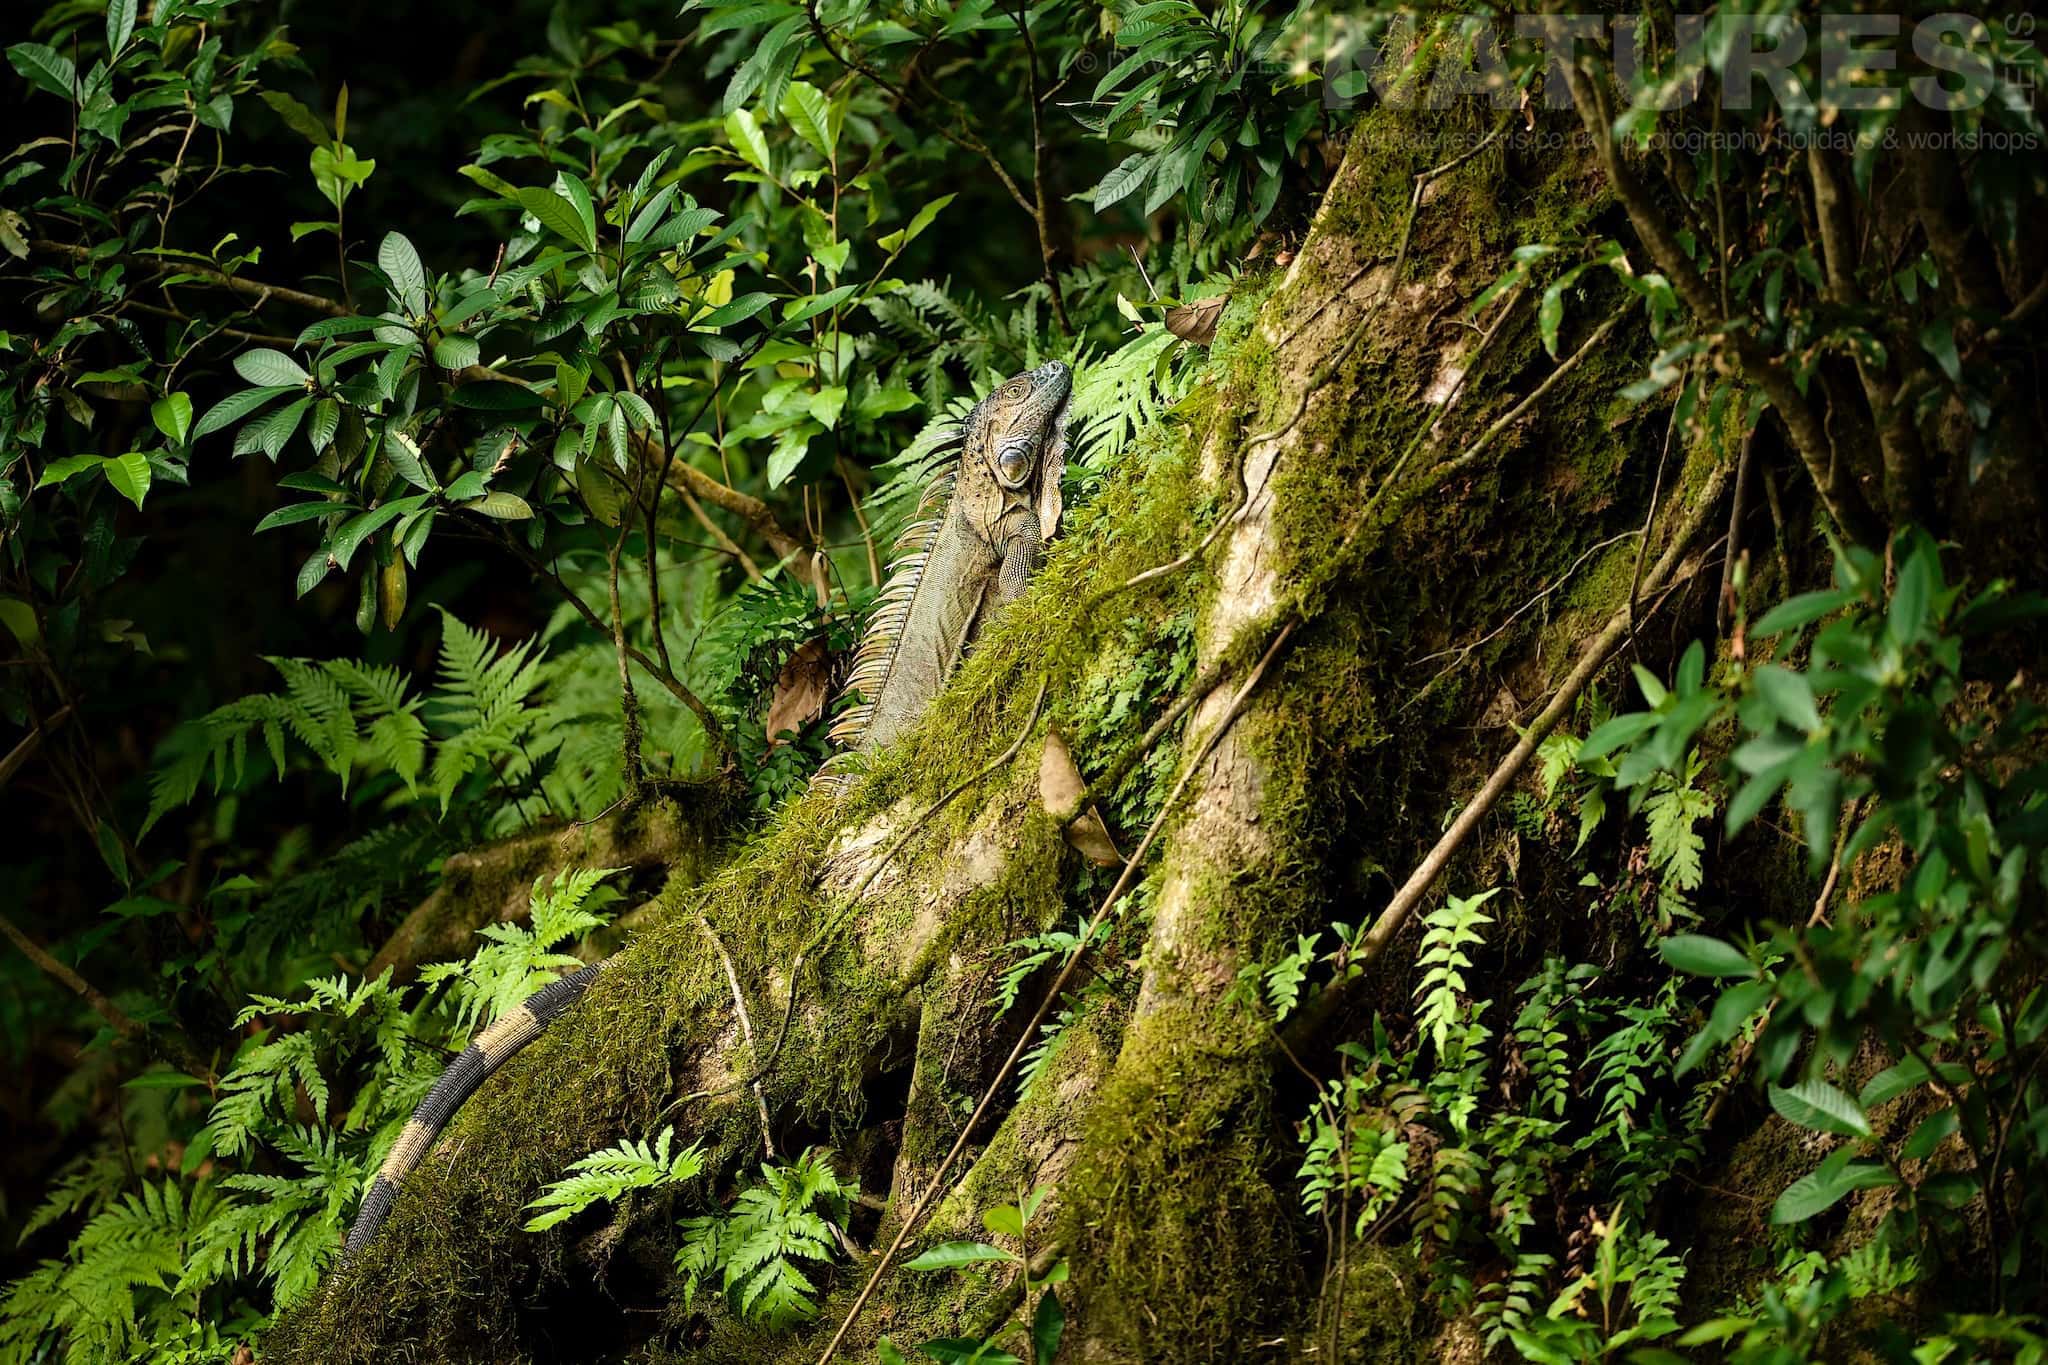 A Basilisk Camouflaged In Its Environment Typical Of The Kind Of Image We Hope You Will Capture During Our Costa Rican Wildlife Photography Holiday